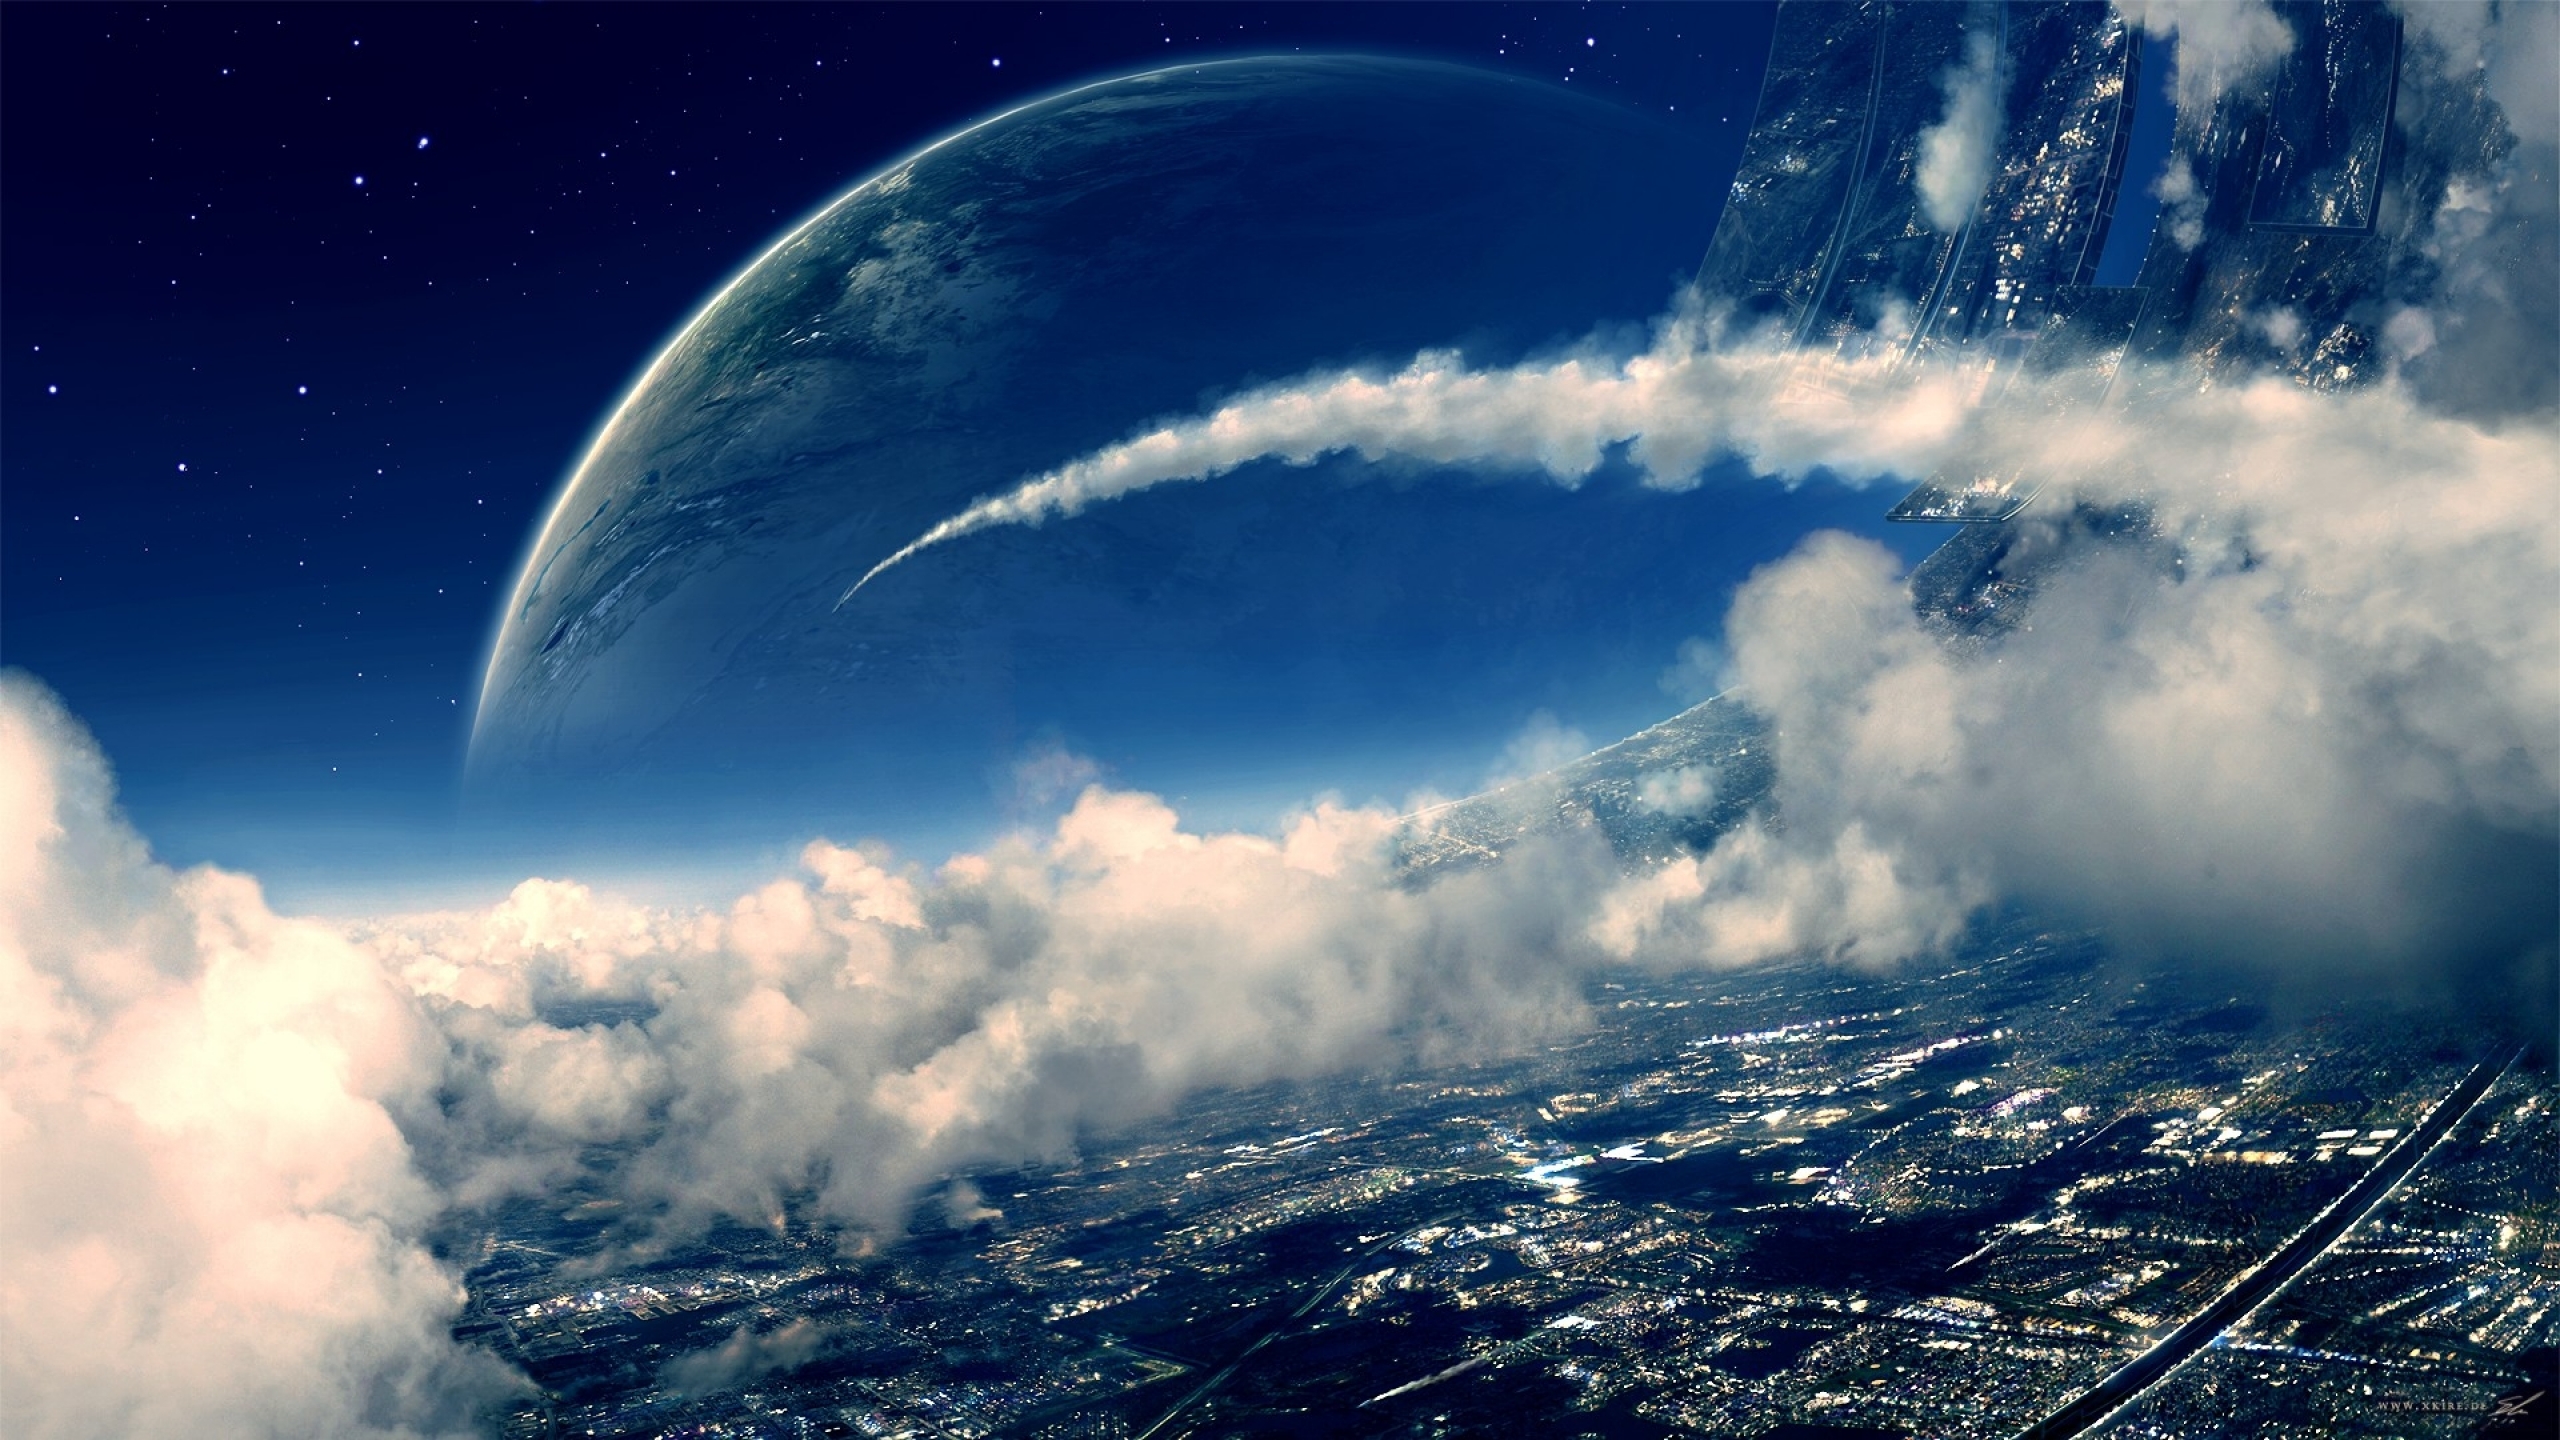 Abstract Clouds Outer Space City Room Wallpaper